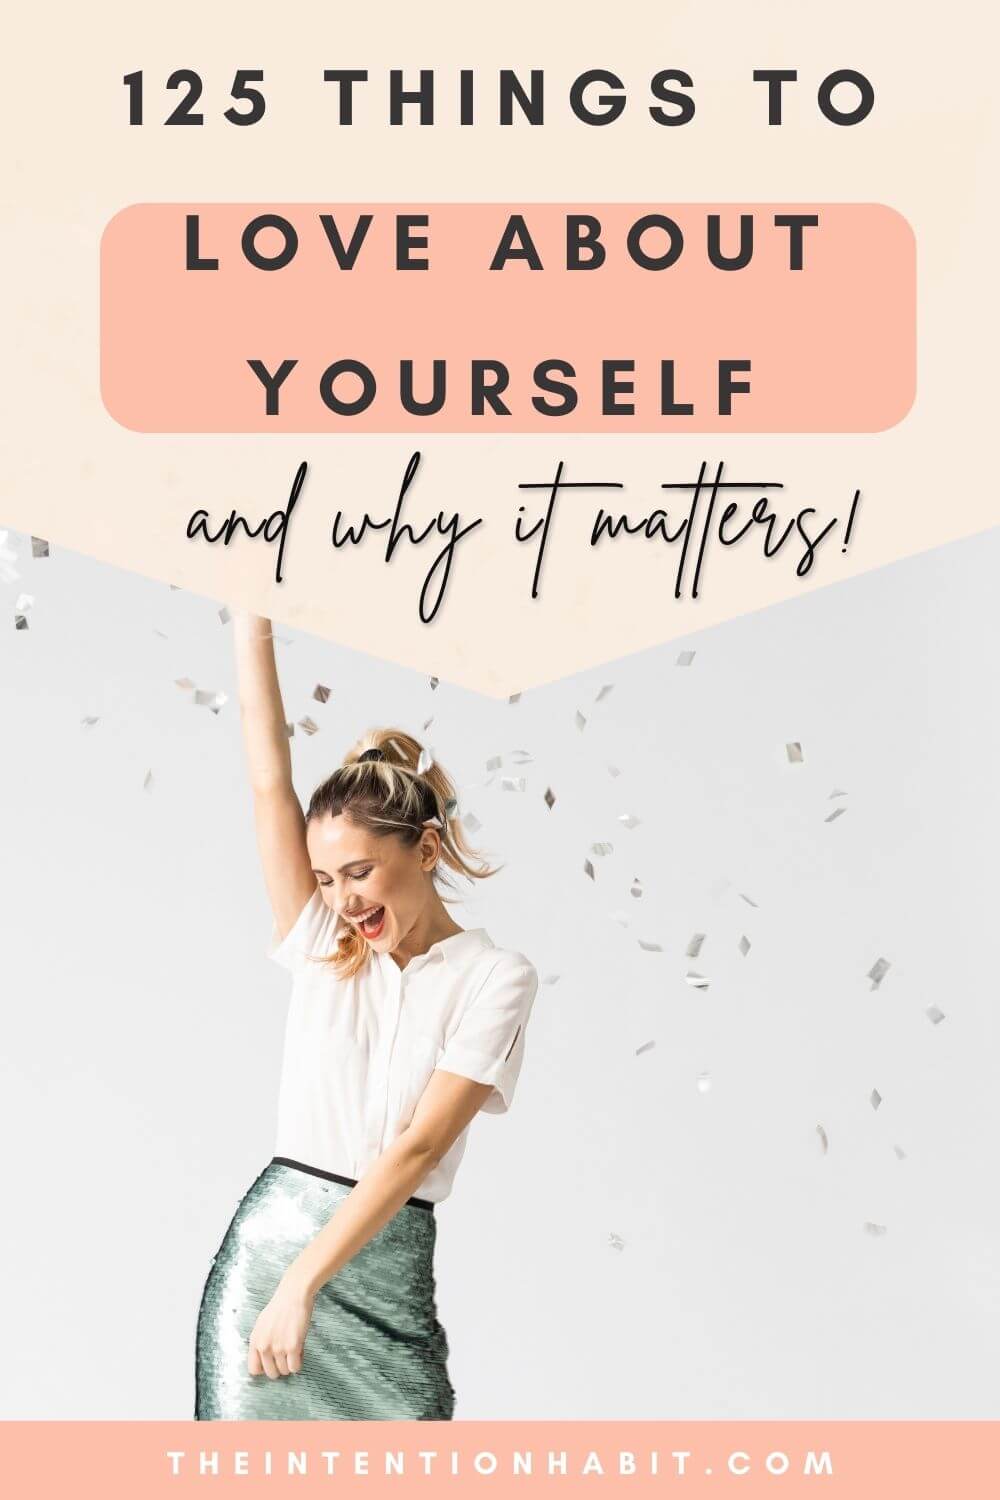 125 things to love about yourself and why it matters.